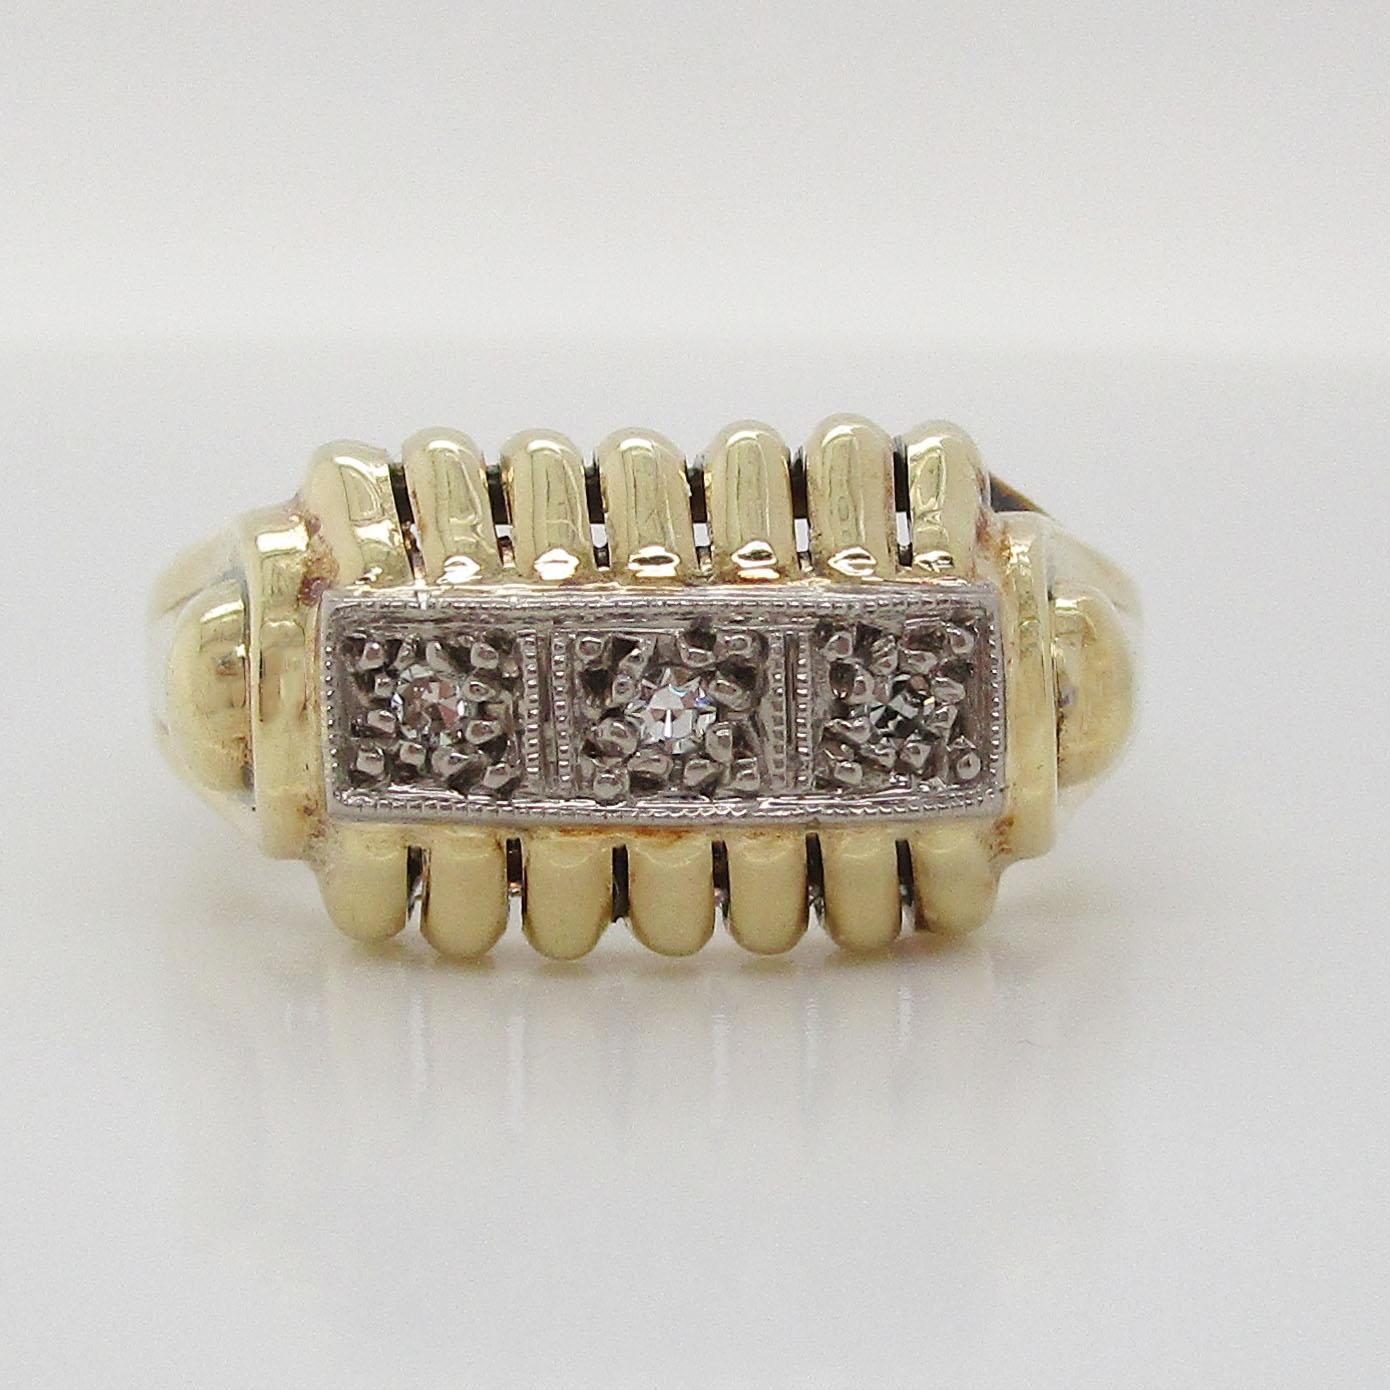 This is a beautiful mid-century ring in 14k yellow gold with a unique, architectural twist on a three-stone diamond ring! This ring takes the classic three-stone layout, which is timeless in its symbolism of the past, present, and future, and adds a